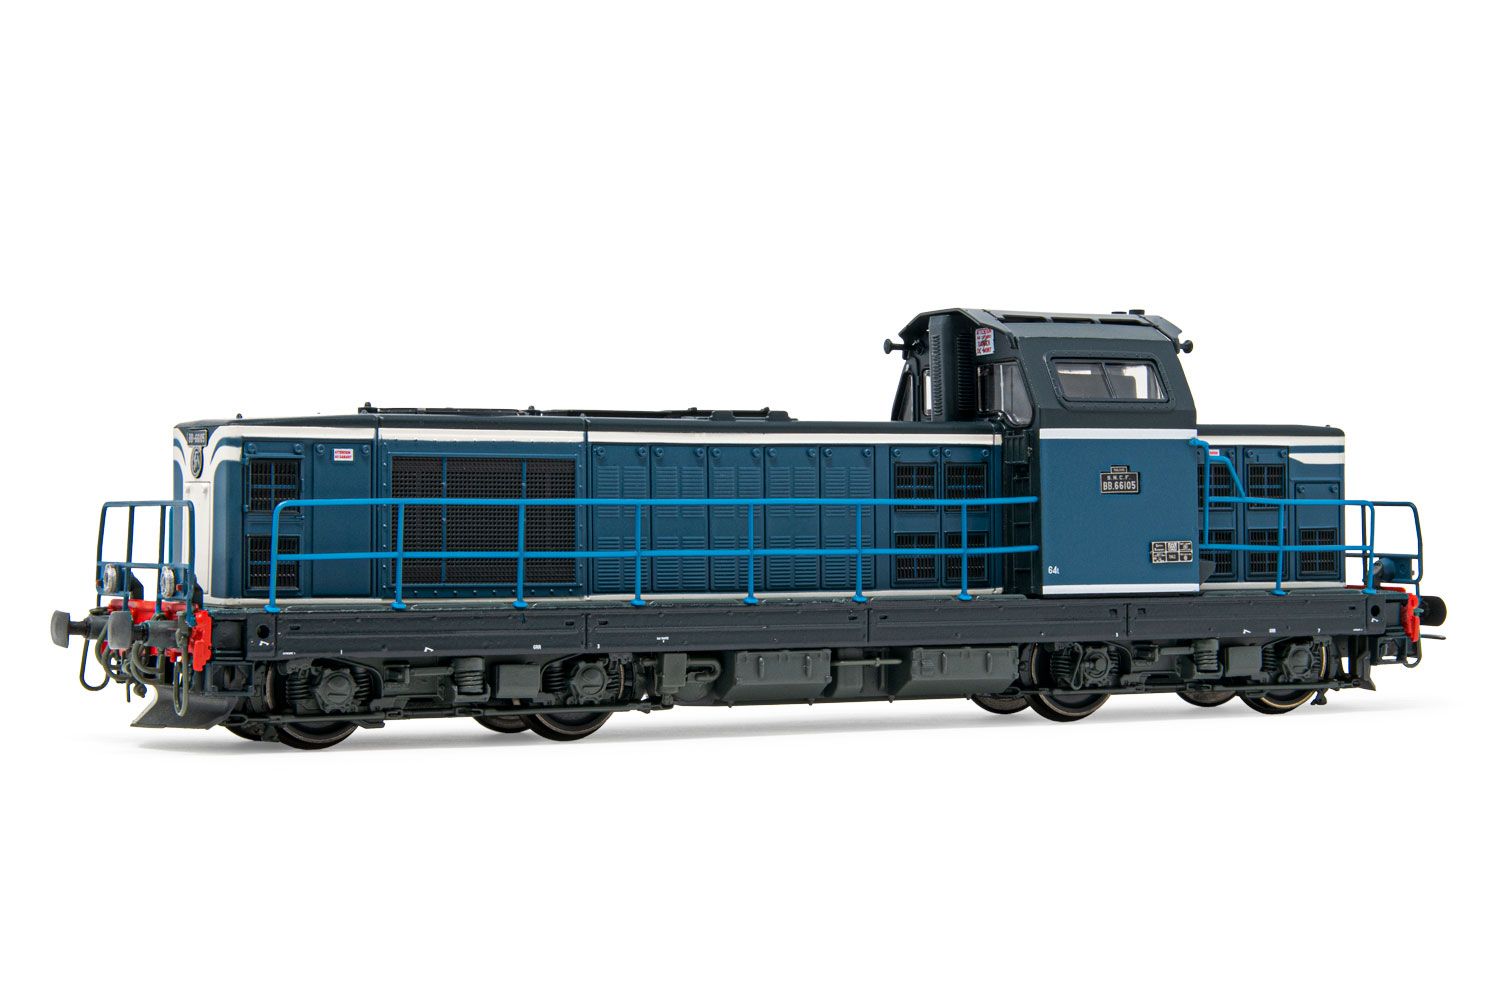 LOCOMOTIVE DIESEL TYPE BB 66001 ARMA-CAISSE EN BOIS MARQUAGE SNCFReduct  models from .